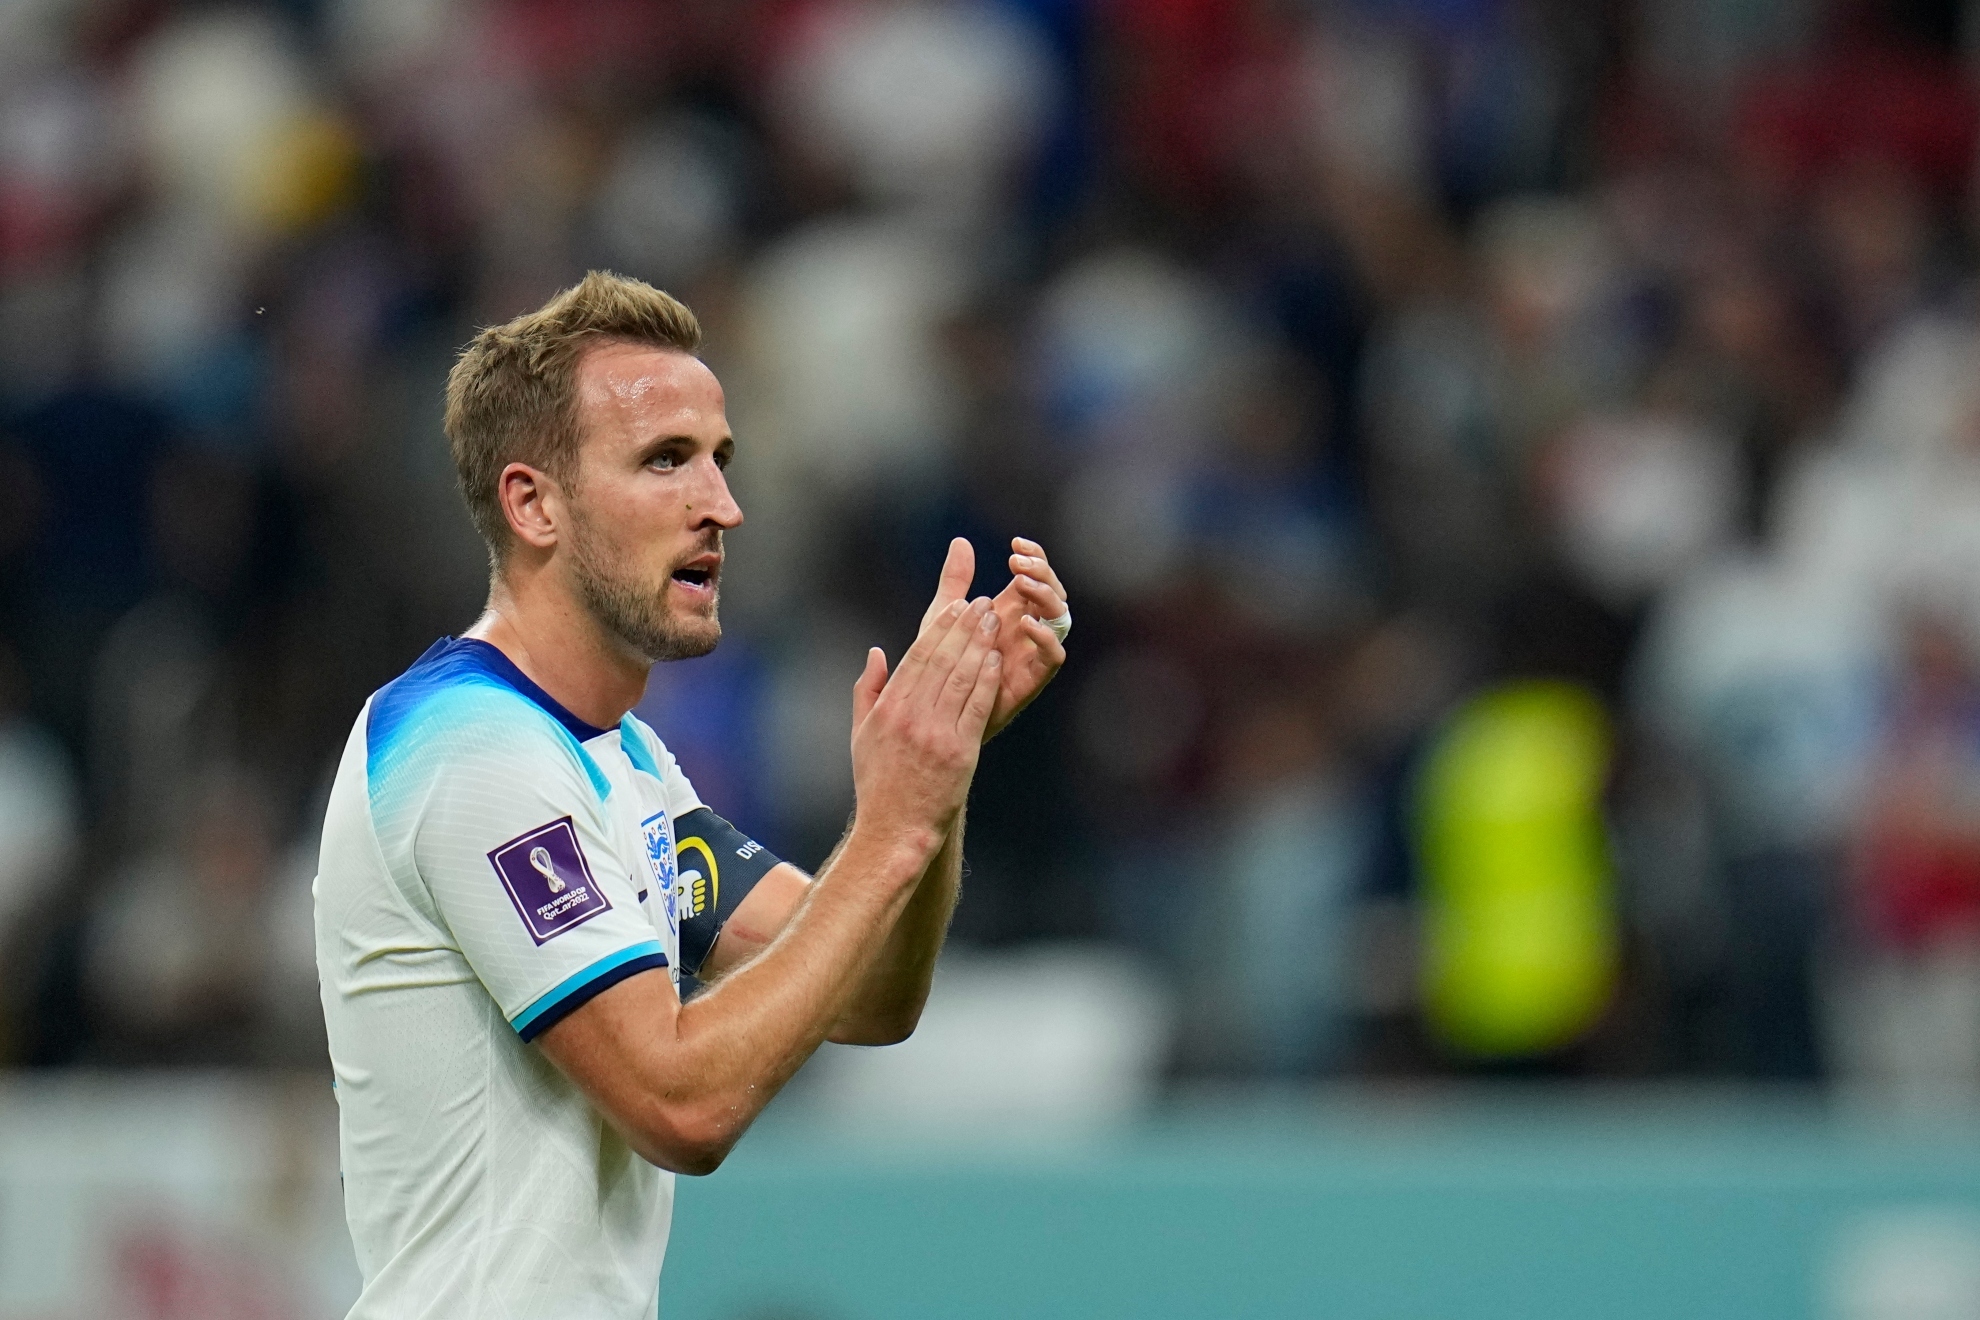 Harry Kane surprisingly says that he respects the USMNT after today's scoreless draw